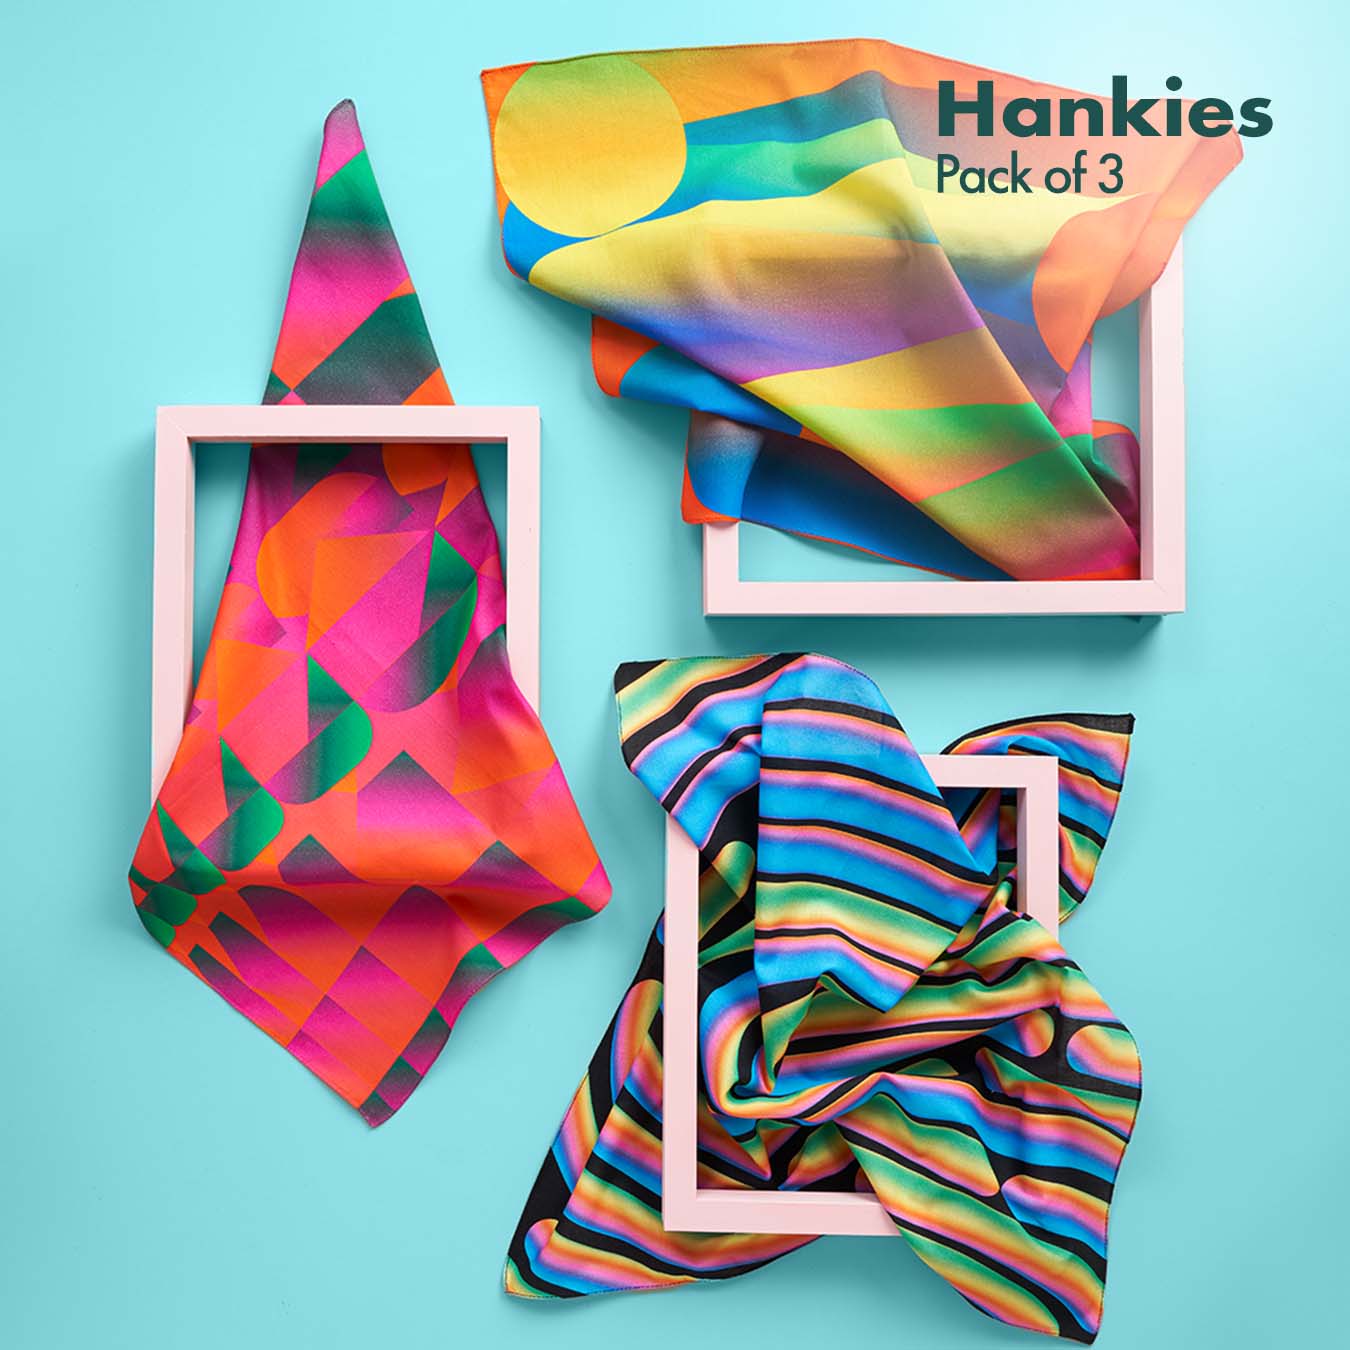 Shapes Of You! Men's Hankies, 100% Organic Cotton, Pack of 3